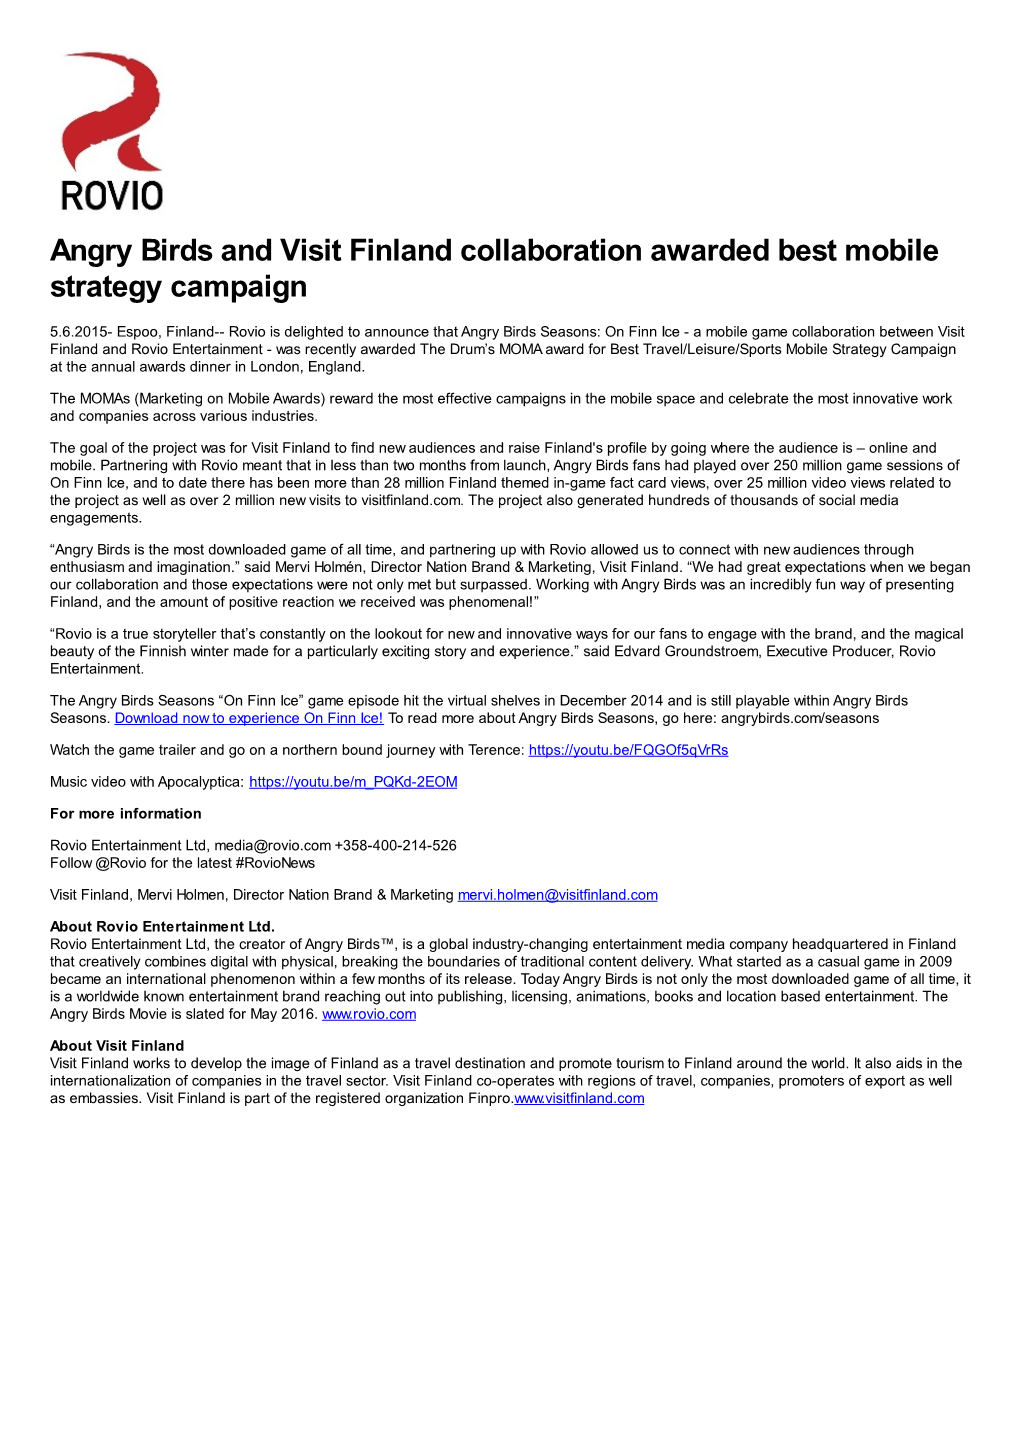 Angry Birds and Visit Finland Collaboration Awarded Best Mobile Strategy Campaign